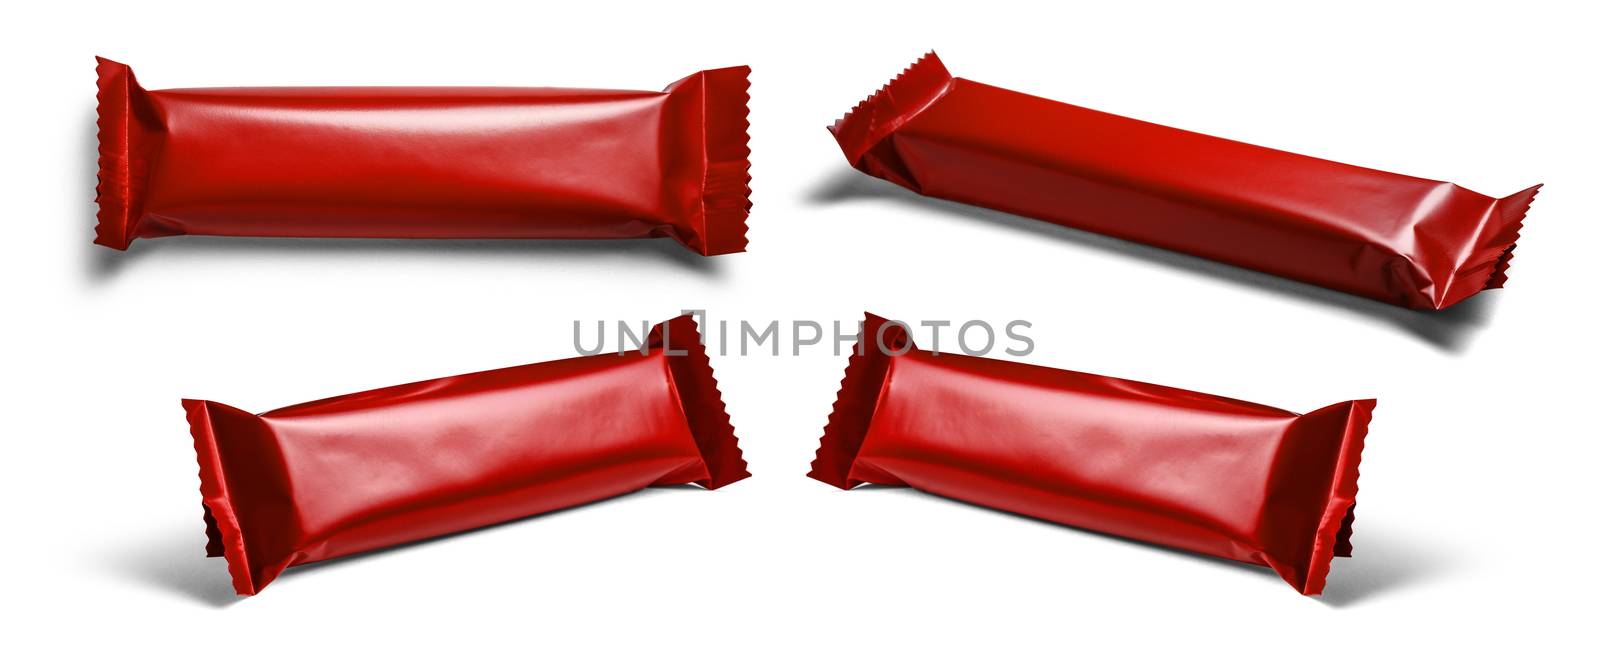 Red packaging template for your design. In different angles on a white background.